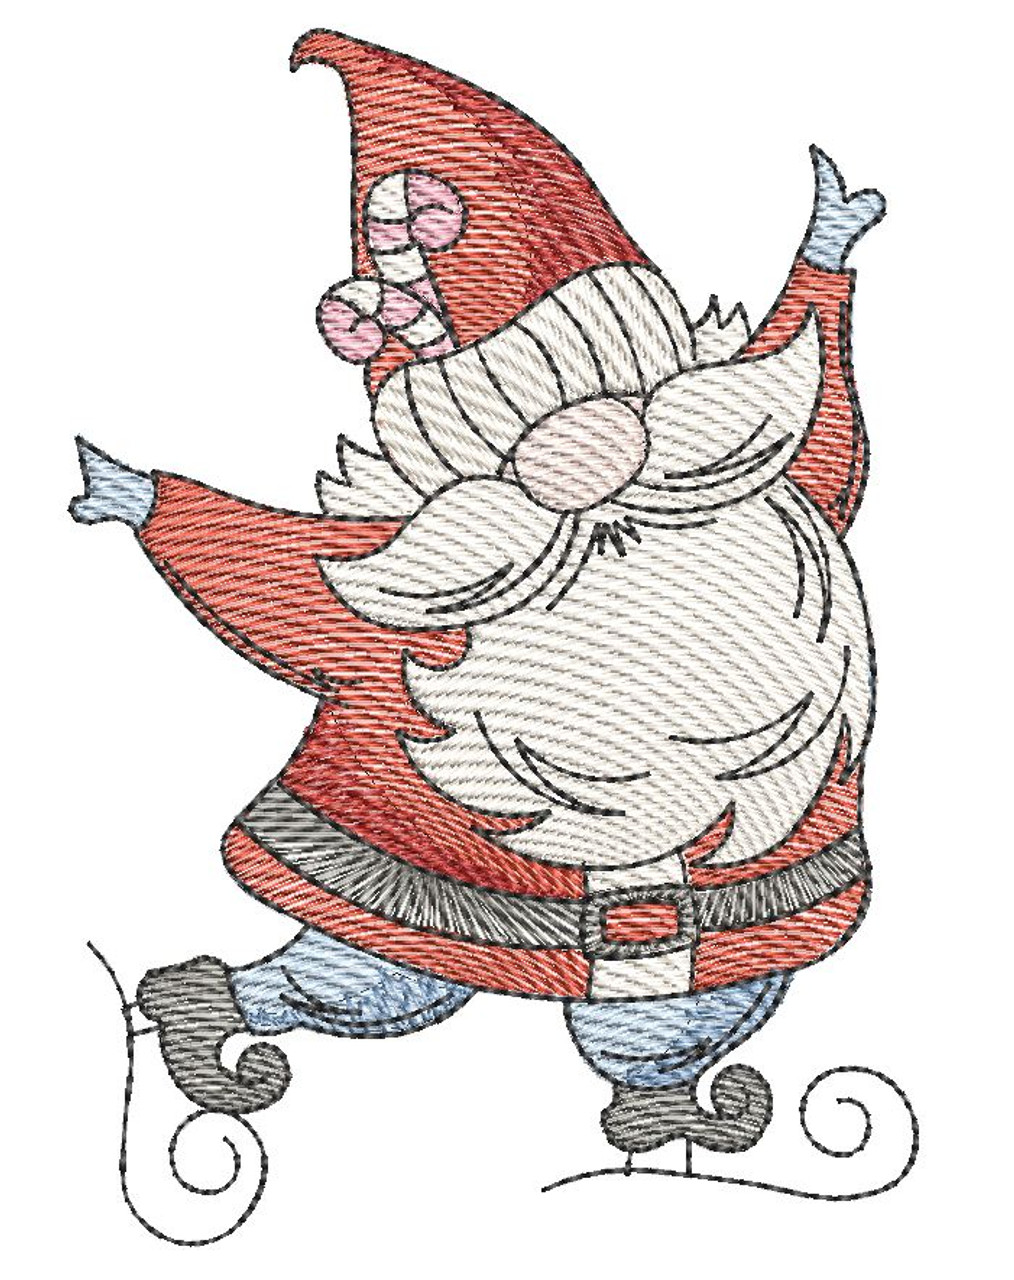 Santa Holiday Gift Card Holder- Fits a 4x4 Hoop - Instant Downloadable  Machine Embroidery - Light Fill Stitch - Tattered Stitch Embroideries